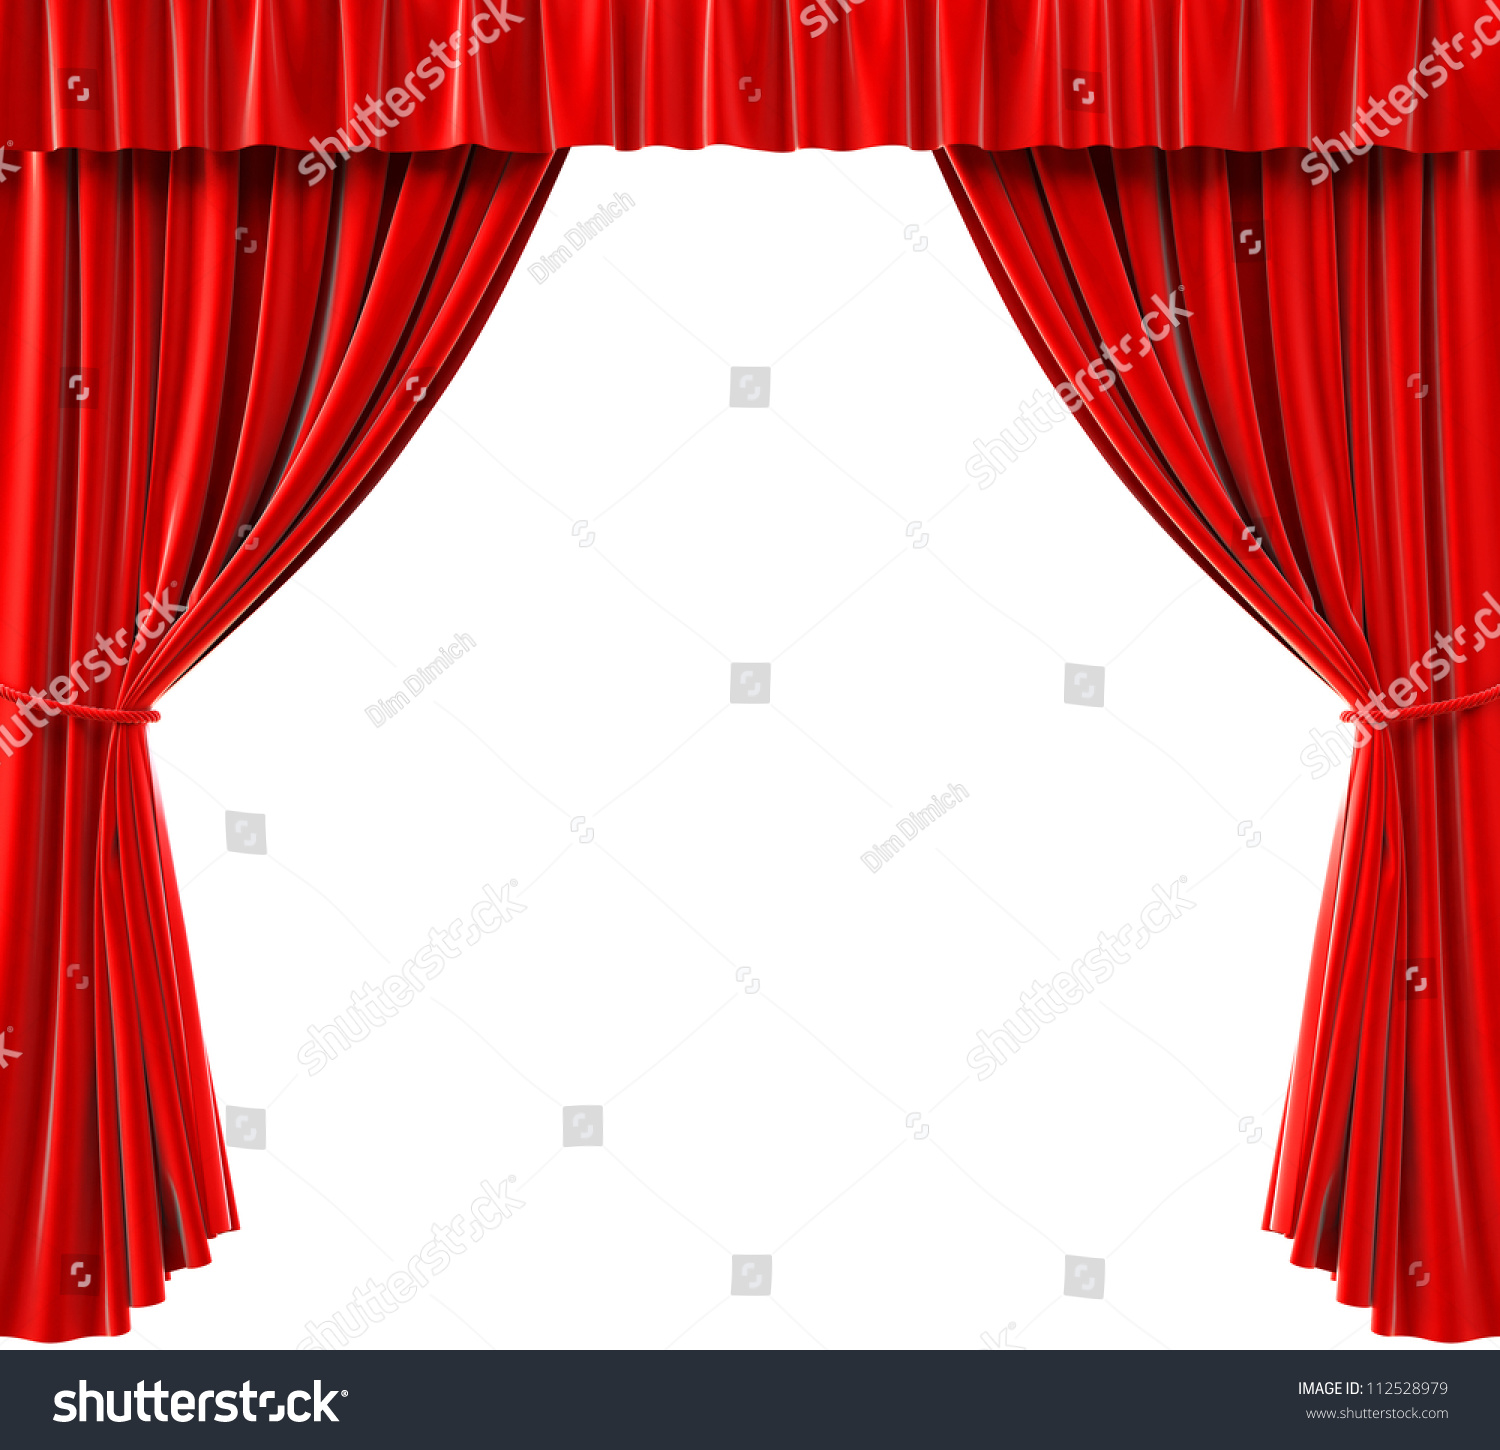 Red Curtains On A White Background Stock Photo 112528979 : Shutterstock